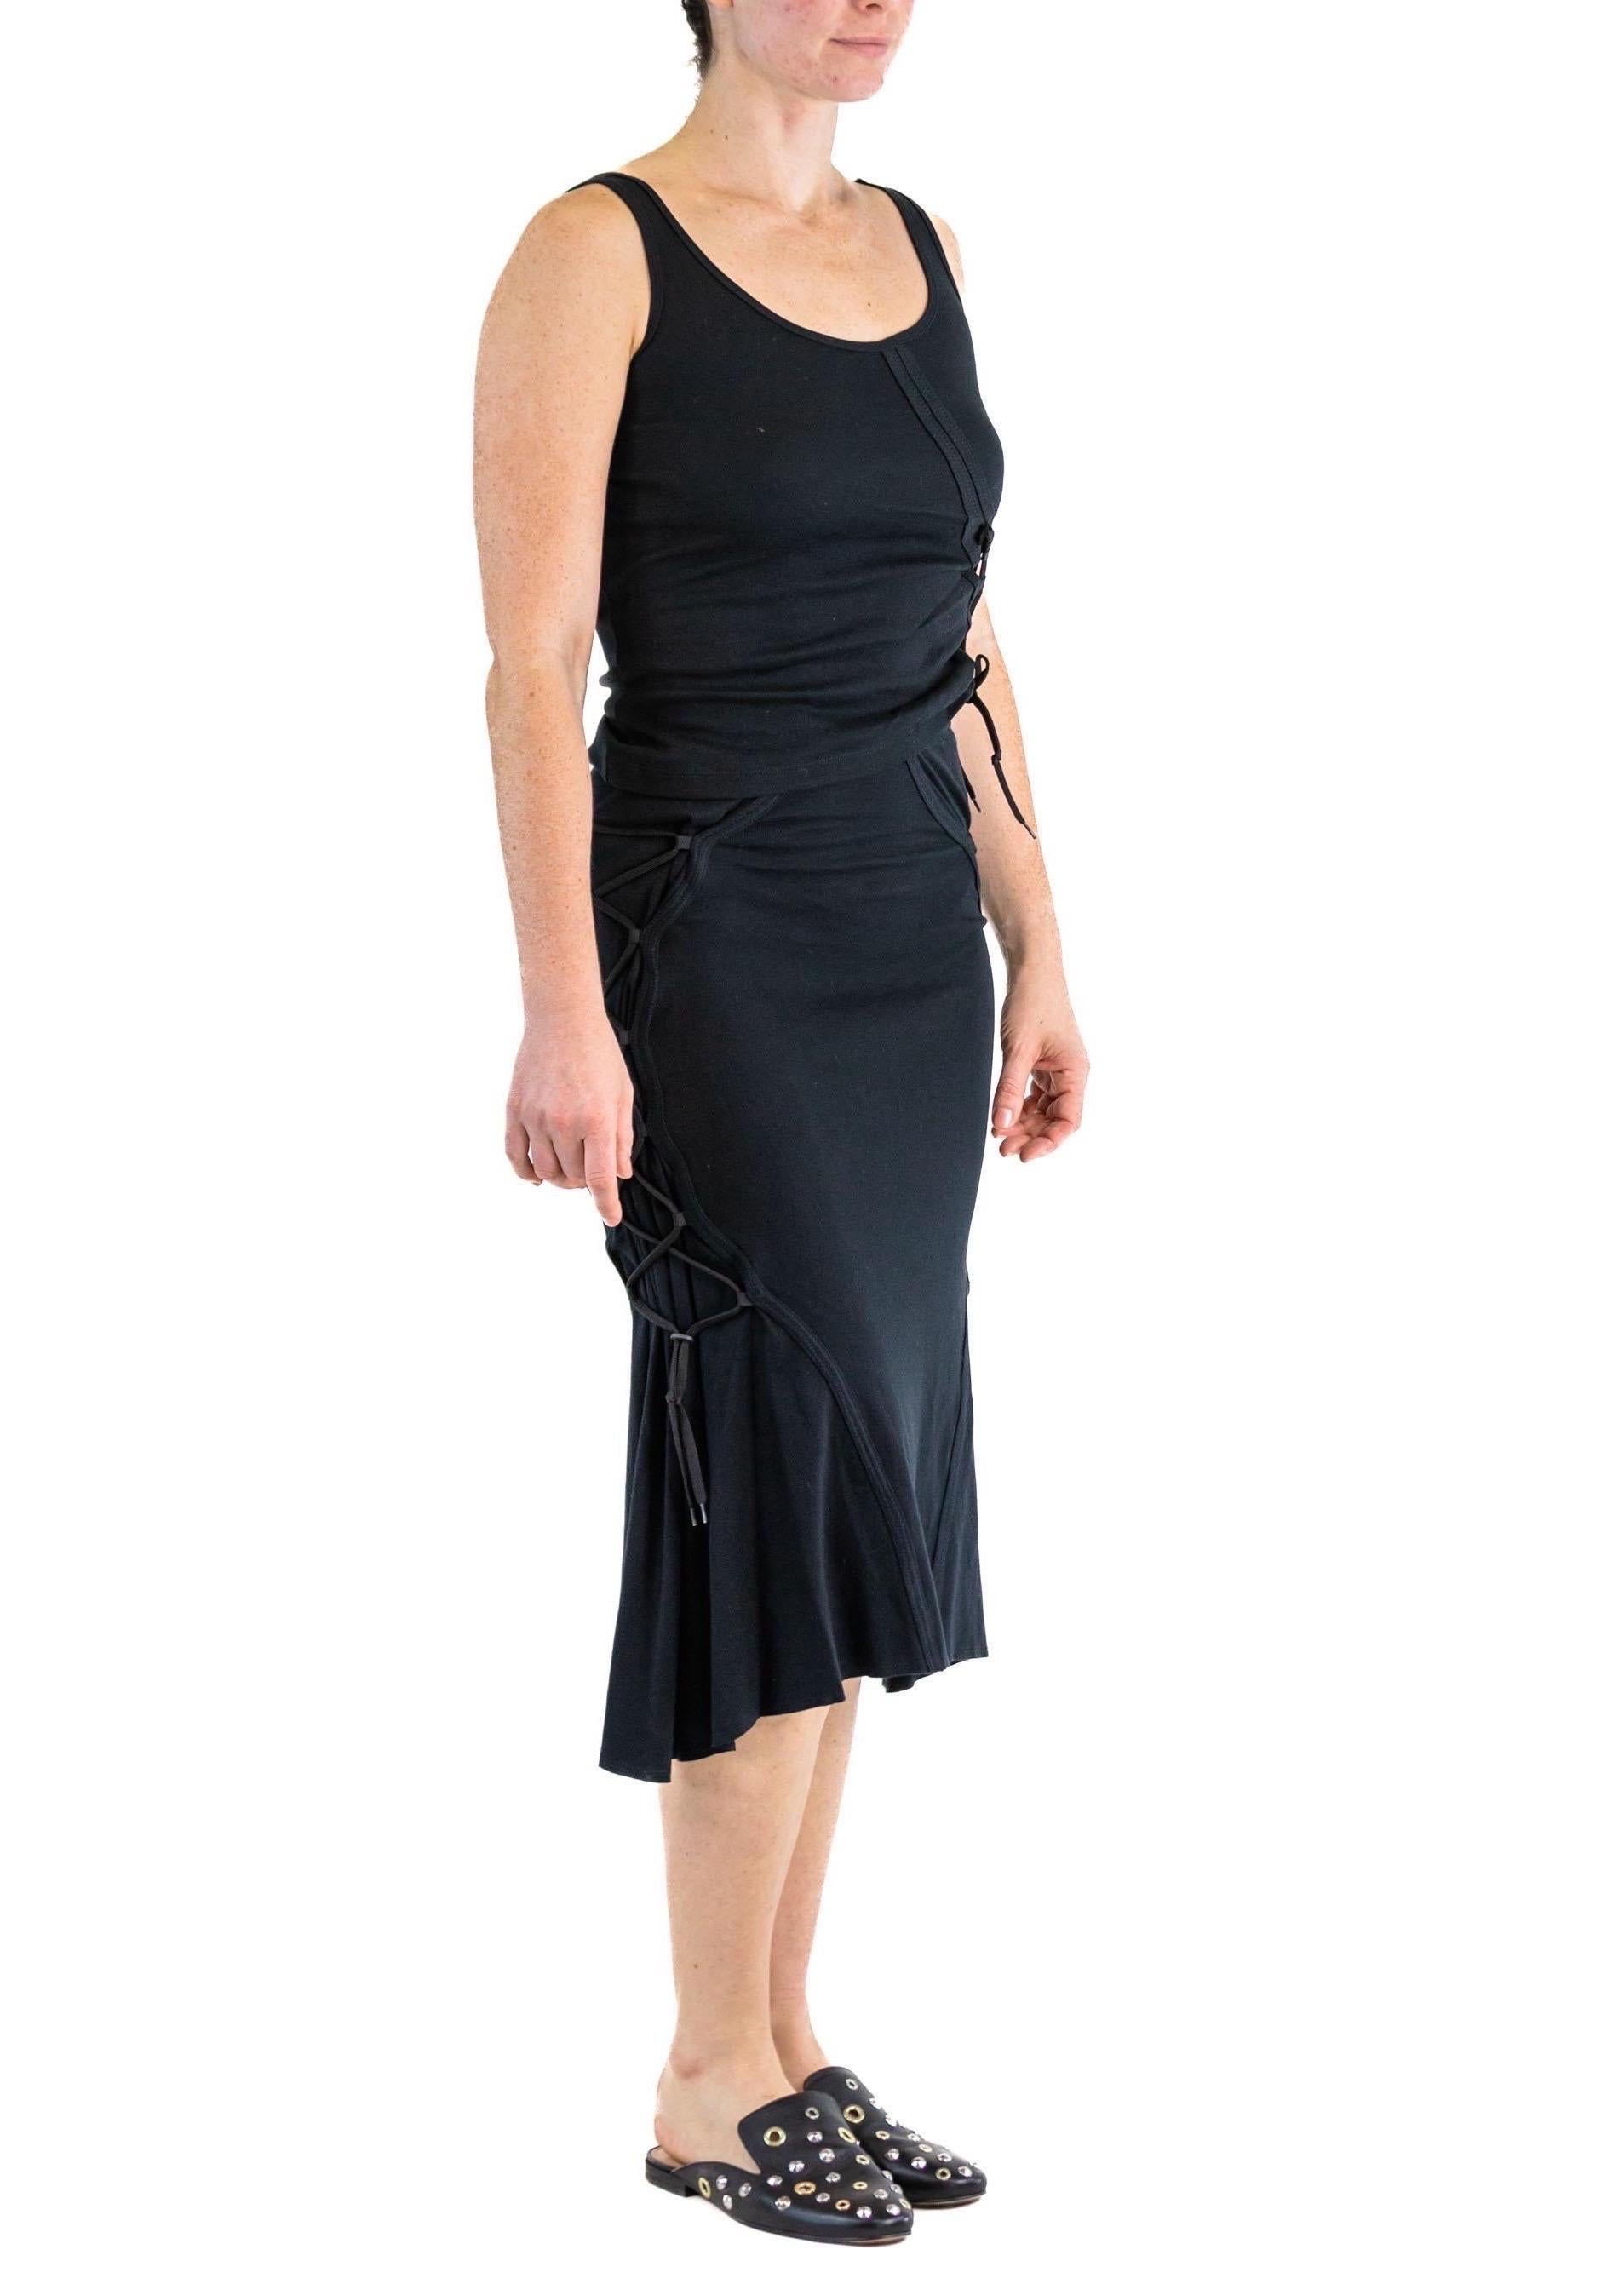 1990S ISSEY MIYAKES Black Cotton Blend Stretch Top & Skirt Ensemble With Lace U For Sale 2